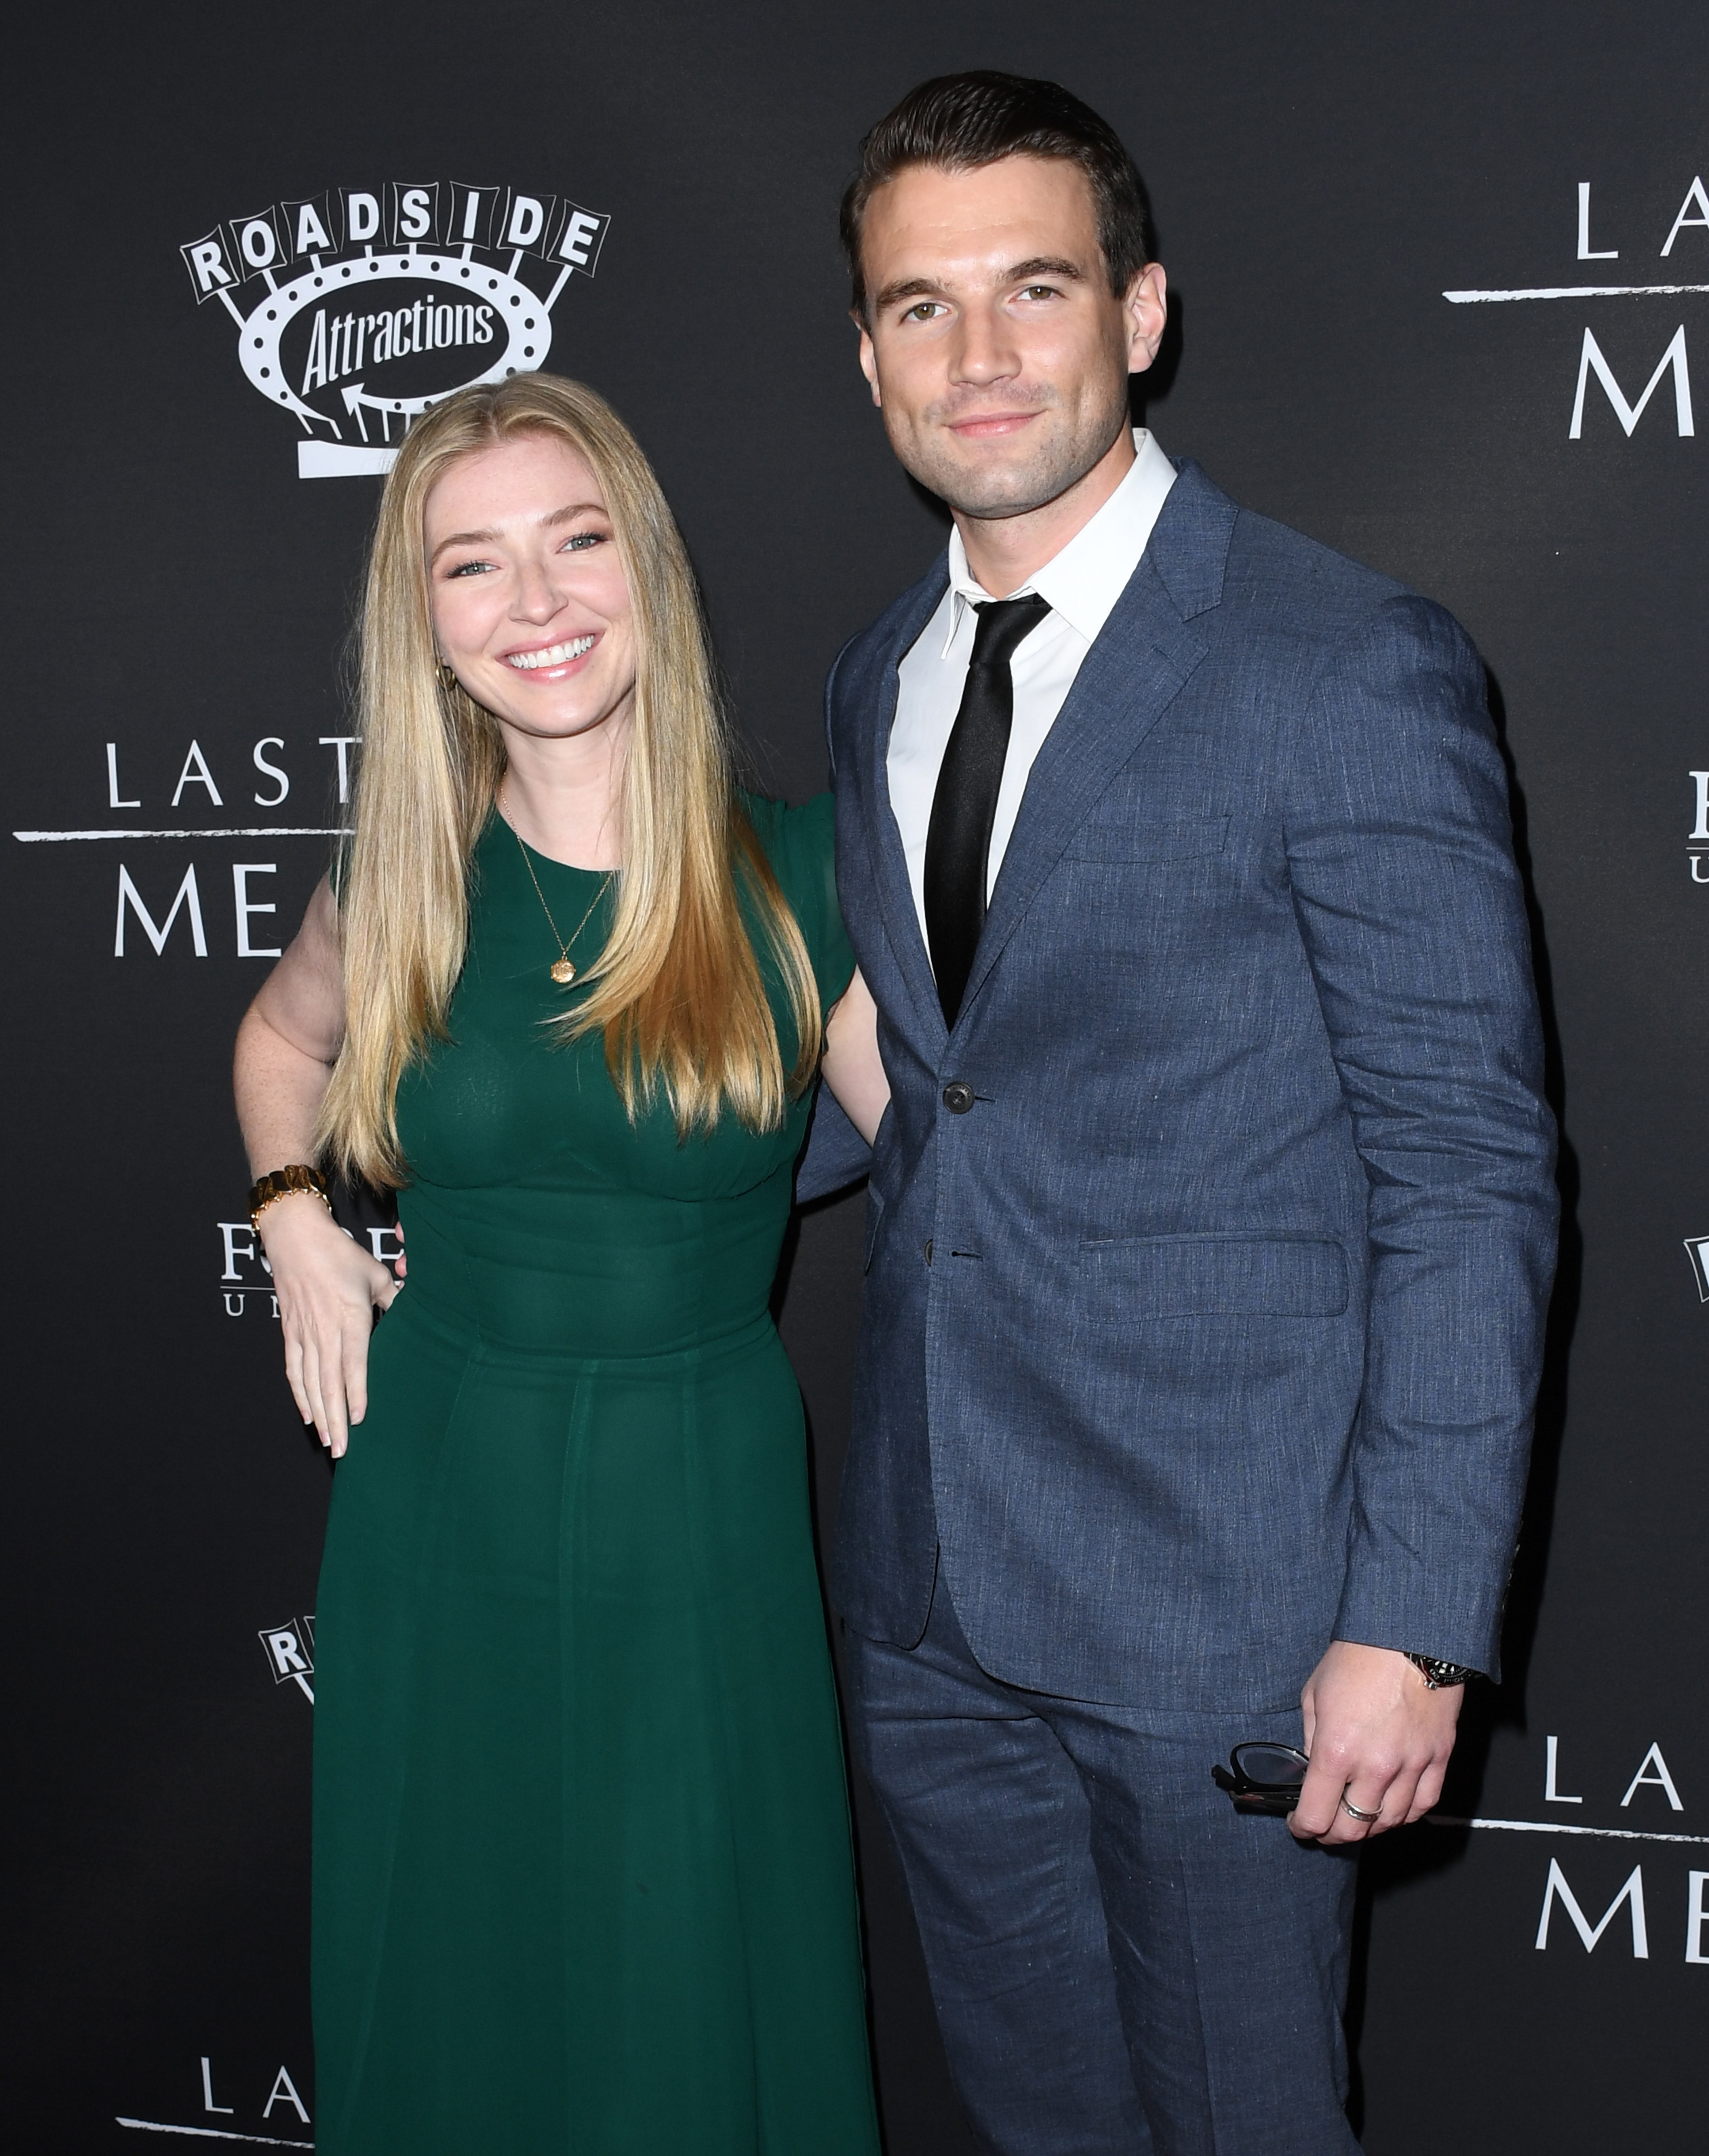 Diana Hopper and Alex Russell attend the Roadside Attractions' premiere of "The Last Full Measure" at ArcLight Hollywood on January 16, 2020, in Hollywood, California. | Source: Getty Images